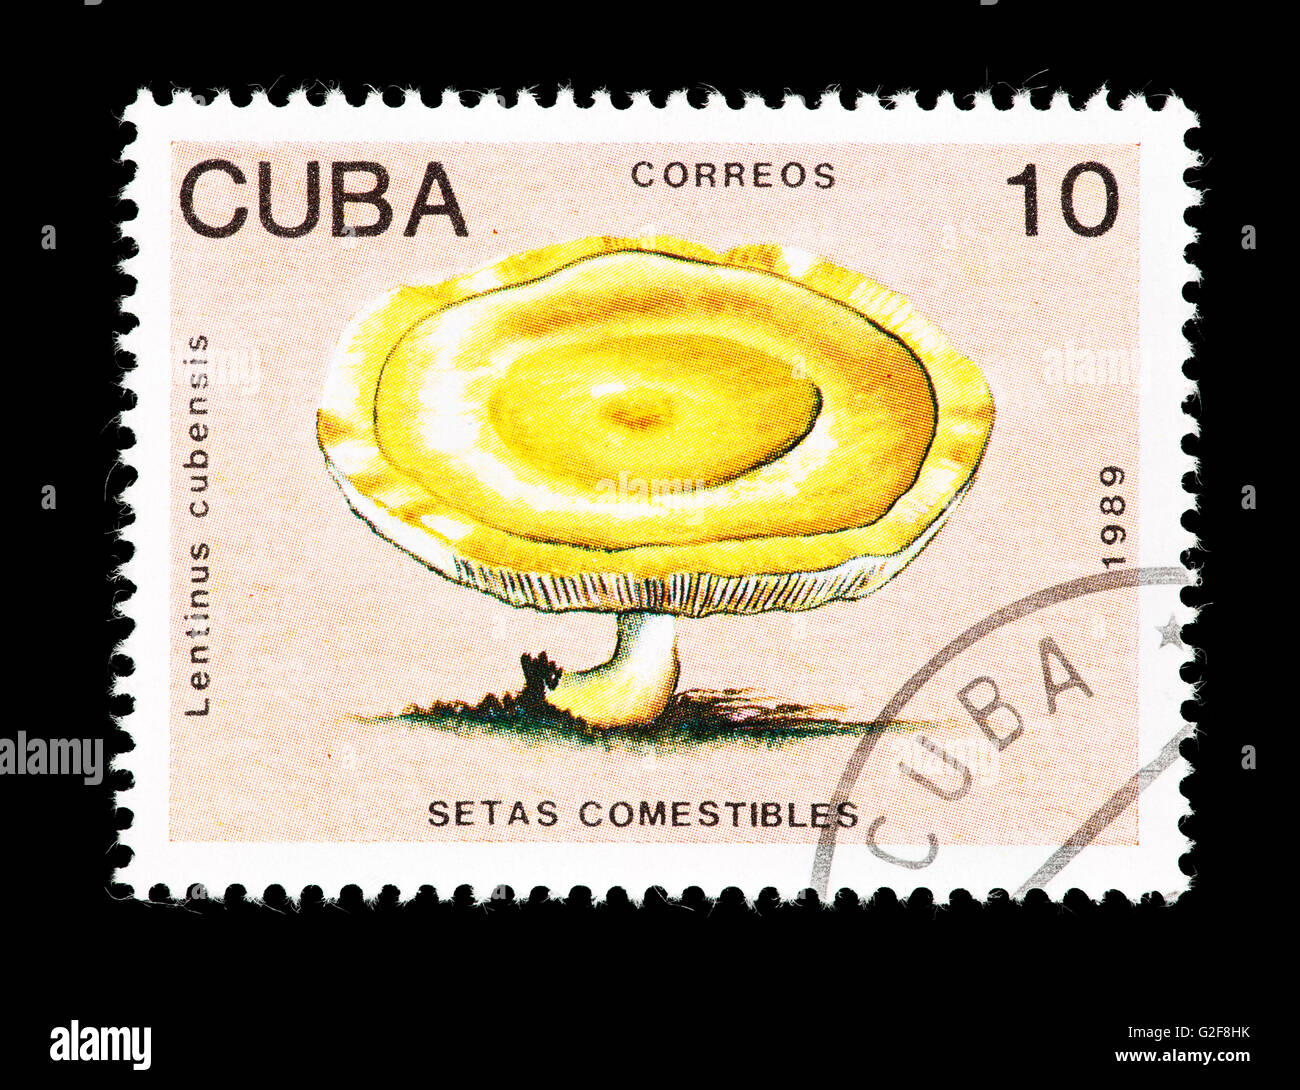 Postage stamp from Cuba depicting an edible mushroom  (Lentinus cubensis) Stock Photo